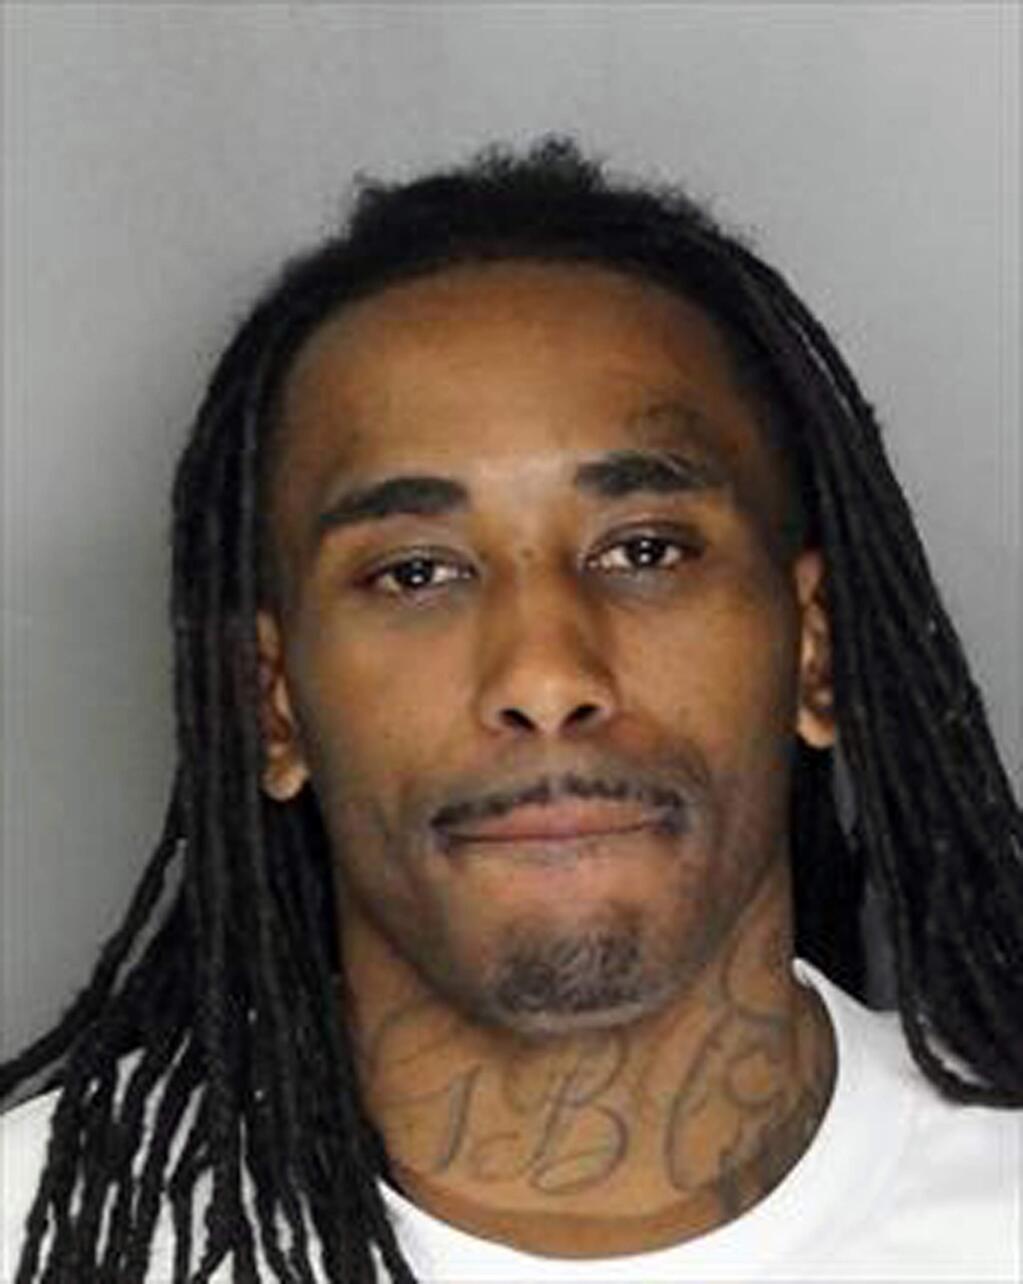 FILE - This undated file booking photo provided by the Sacramento Police Department shows Deandre Chaney Jr. Chaney was arrested in connection with a hammer attack last week on a Sacramento, Calif., woman and two small children. (Sacramento Police Department via AP, File)